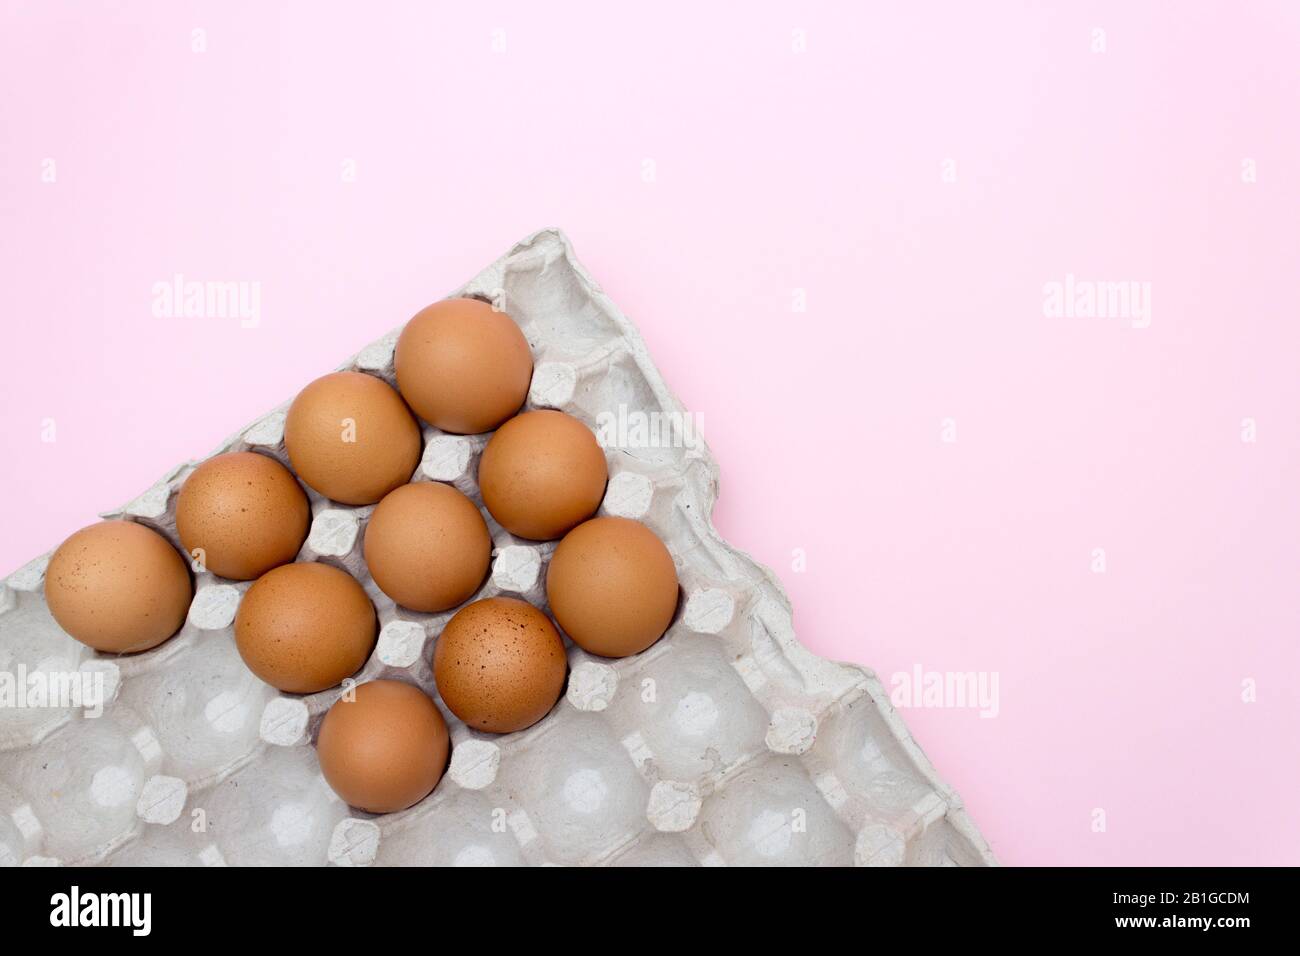 Egg, Eggs on a pink background. Eggs in a tray Stock Photo